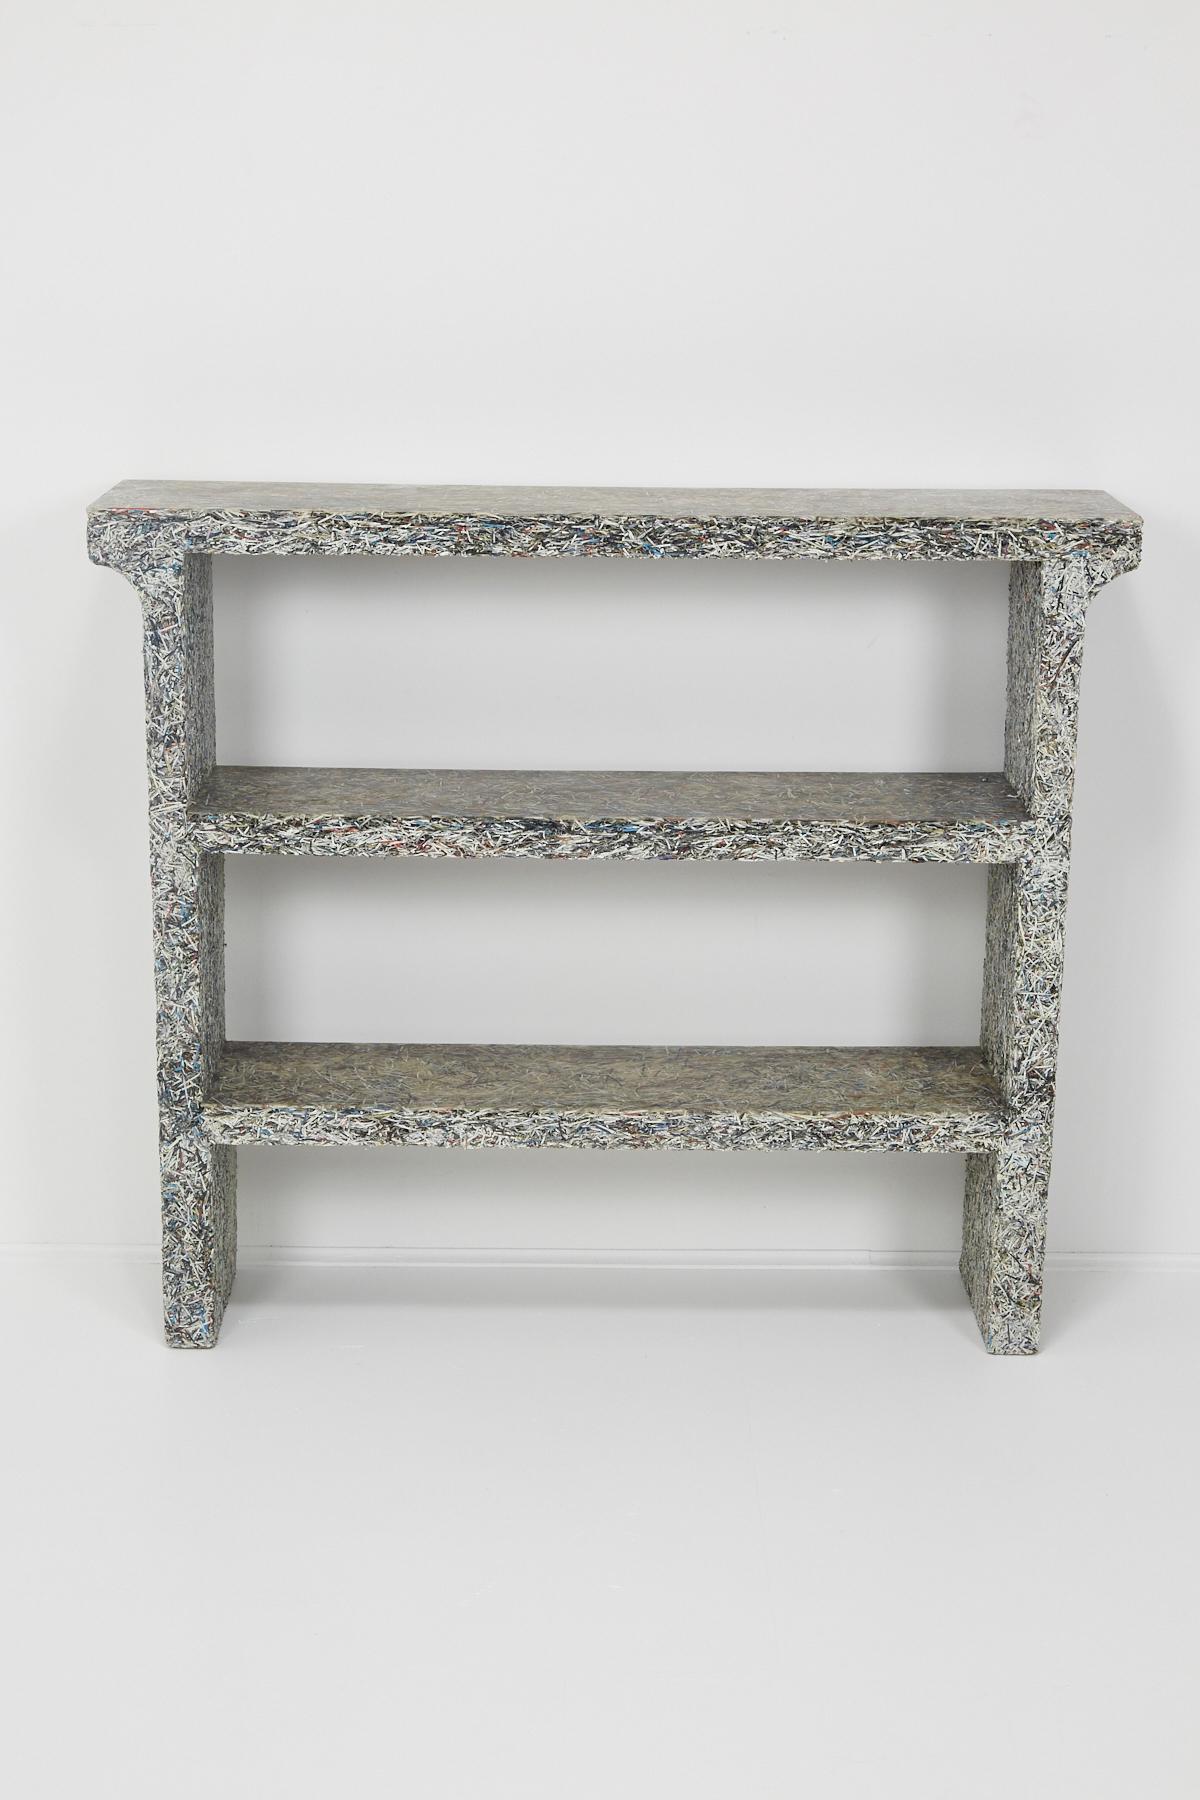 This short bookcase by Belgian-born, Florence-based designer Jens Praet is comprised of shredded Elle Decor magazines. From an edition of 8 and 2APs.

From the artist's website: Arising in reaction to the tremendous amount of office wastepaper,